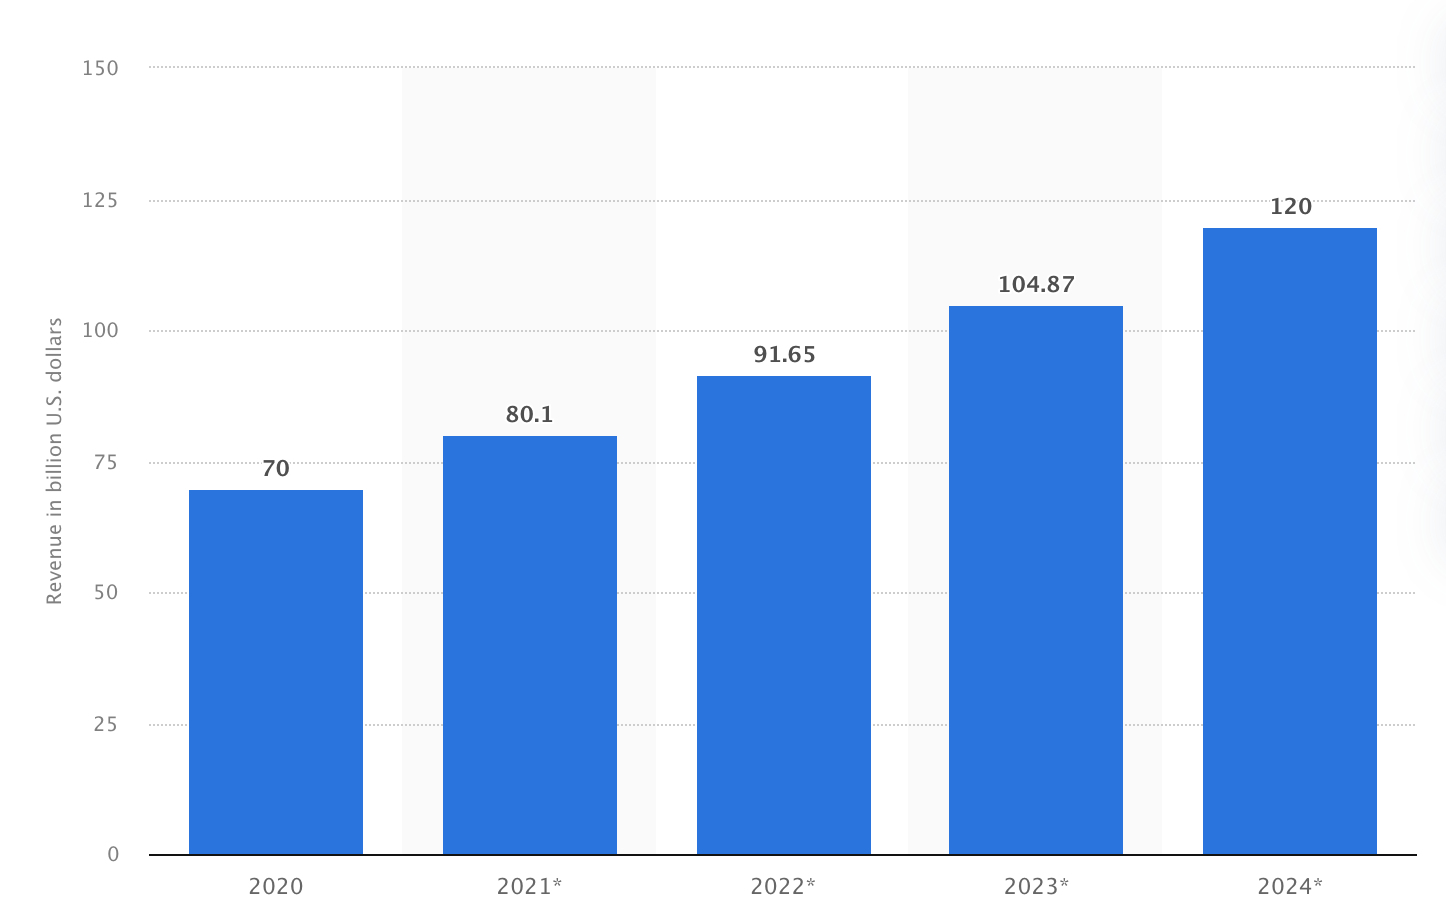 Online Video Advertising Spending Worldwide from 2020 to 2024